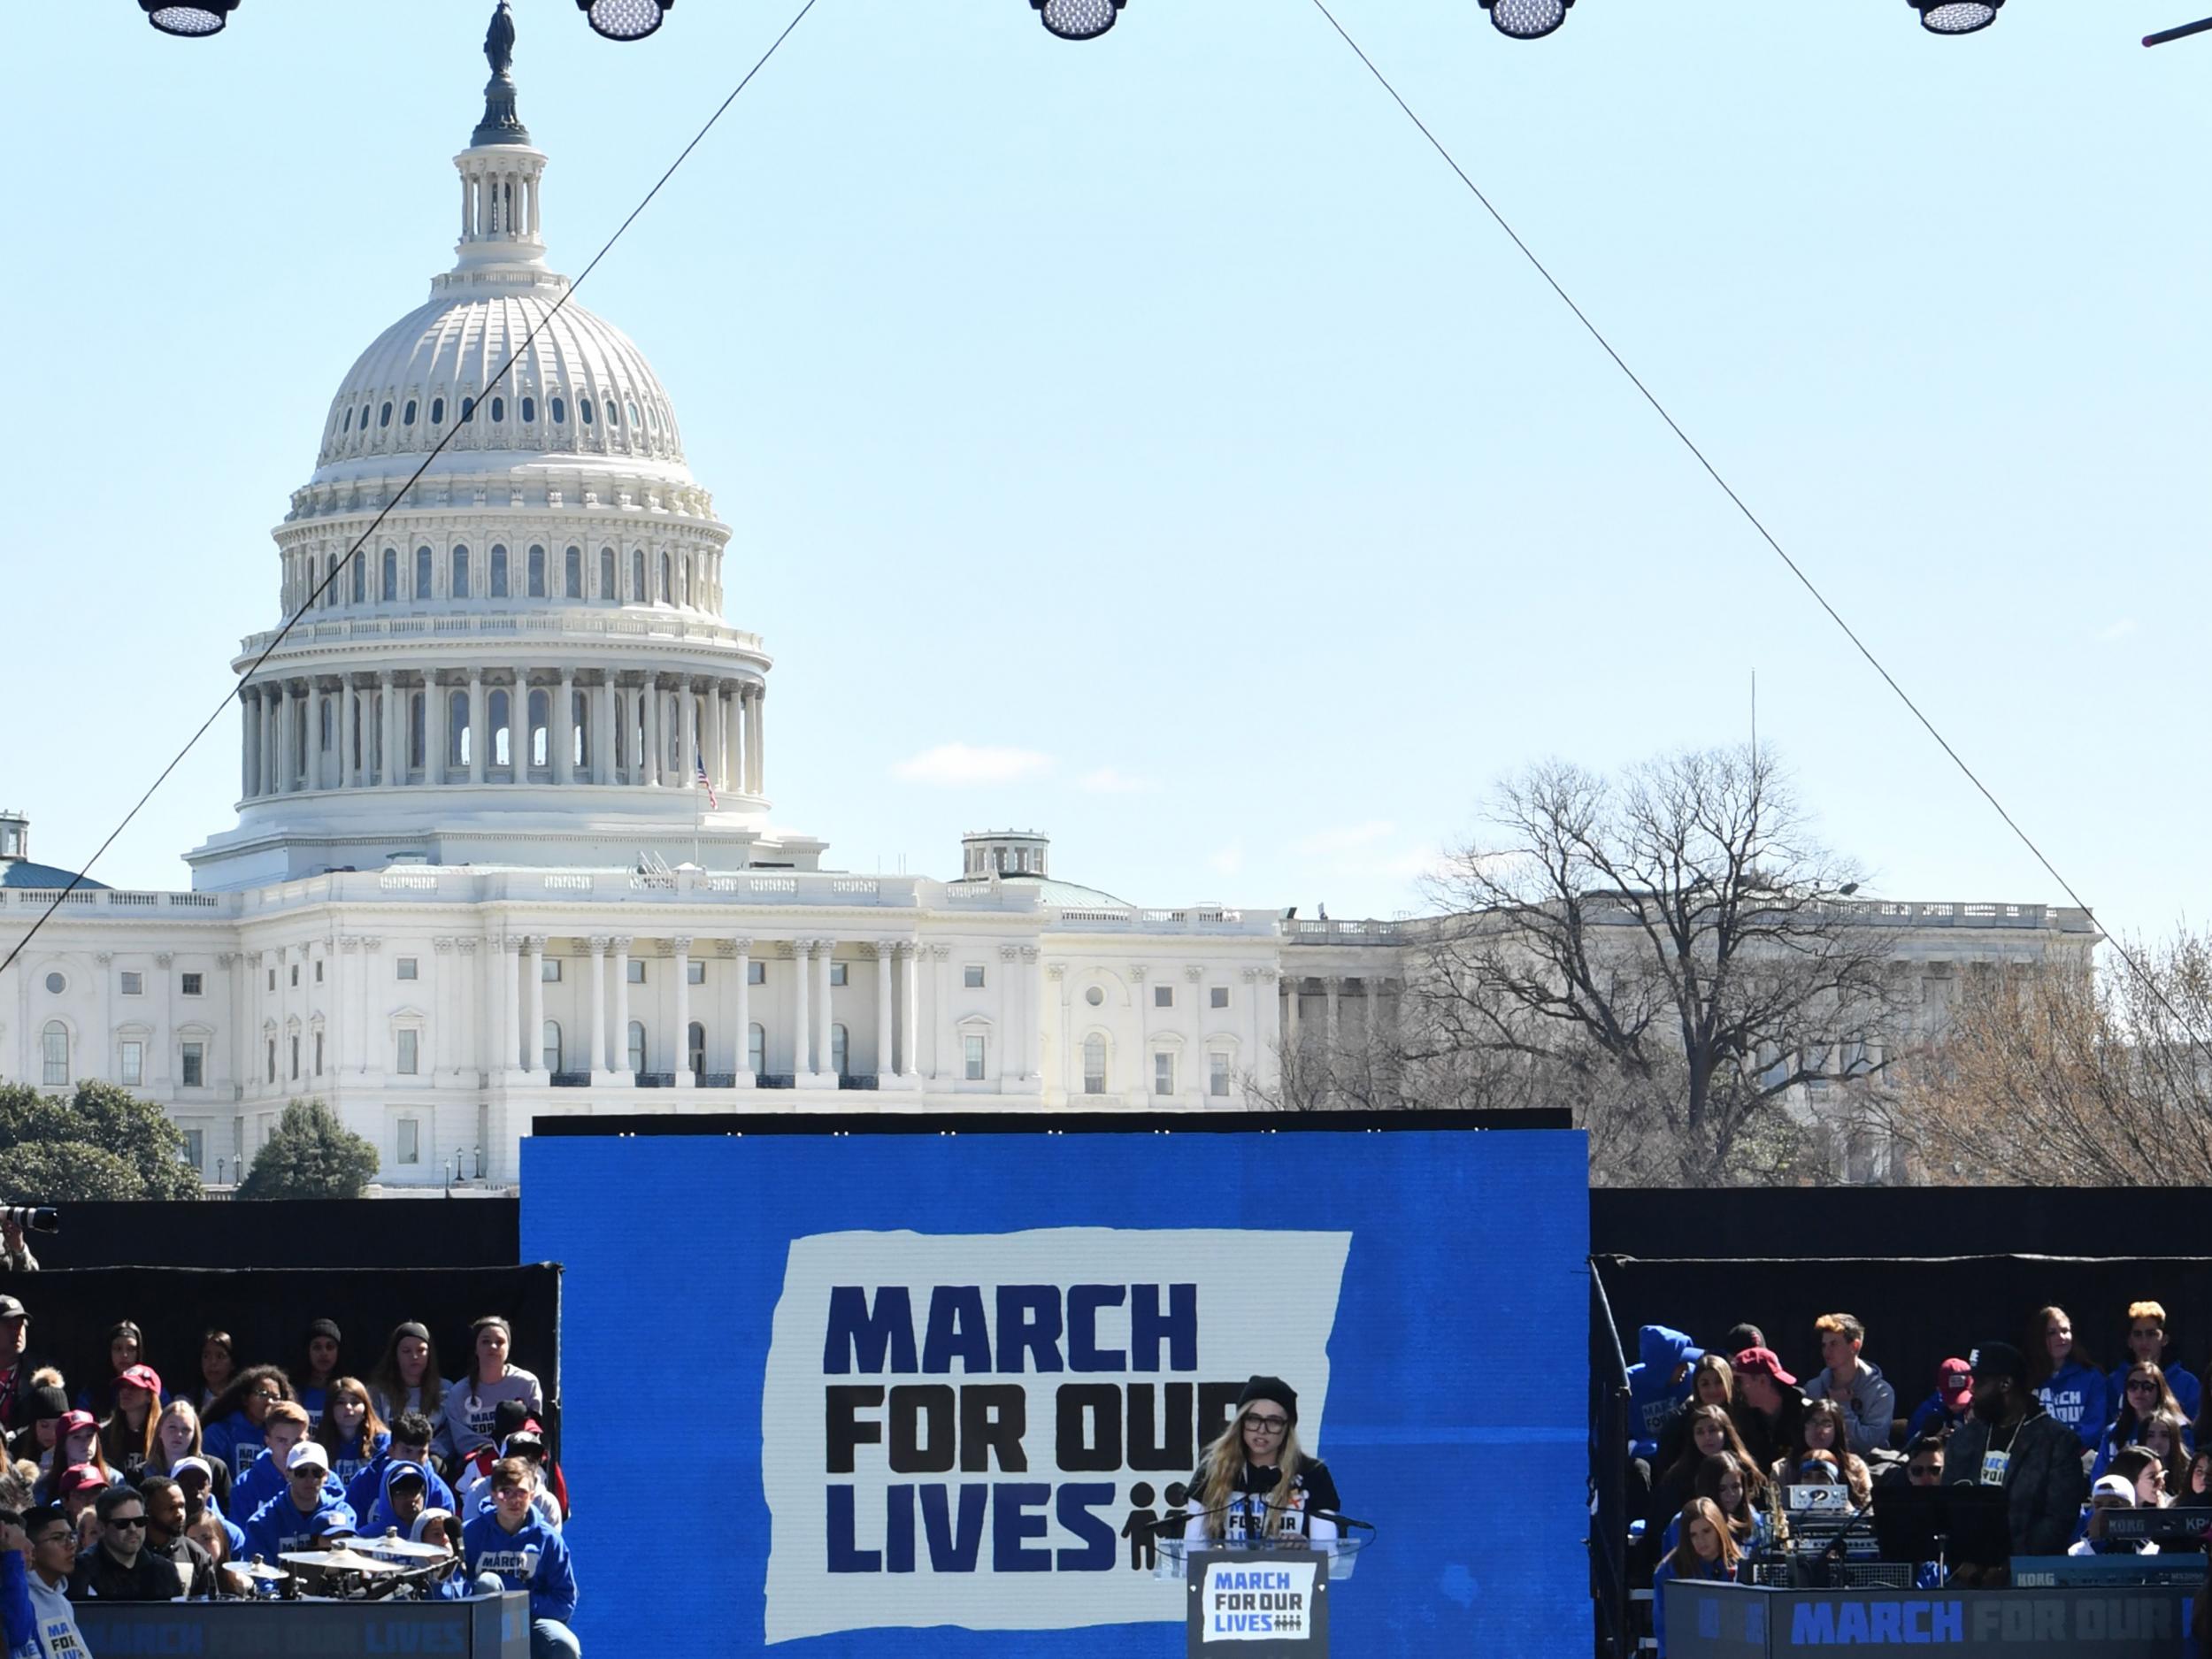 The students previously organized a massive rally in Washington to protest gun violence in March